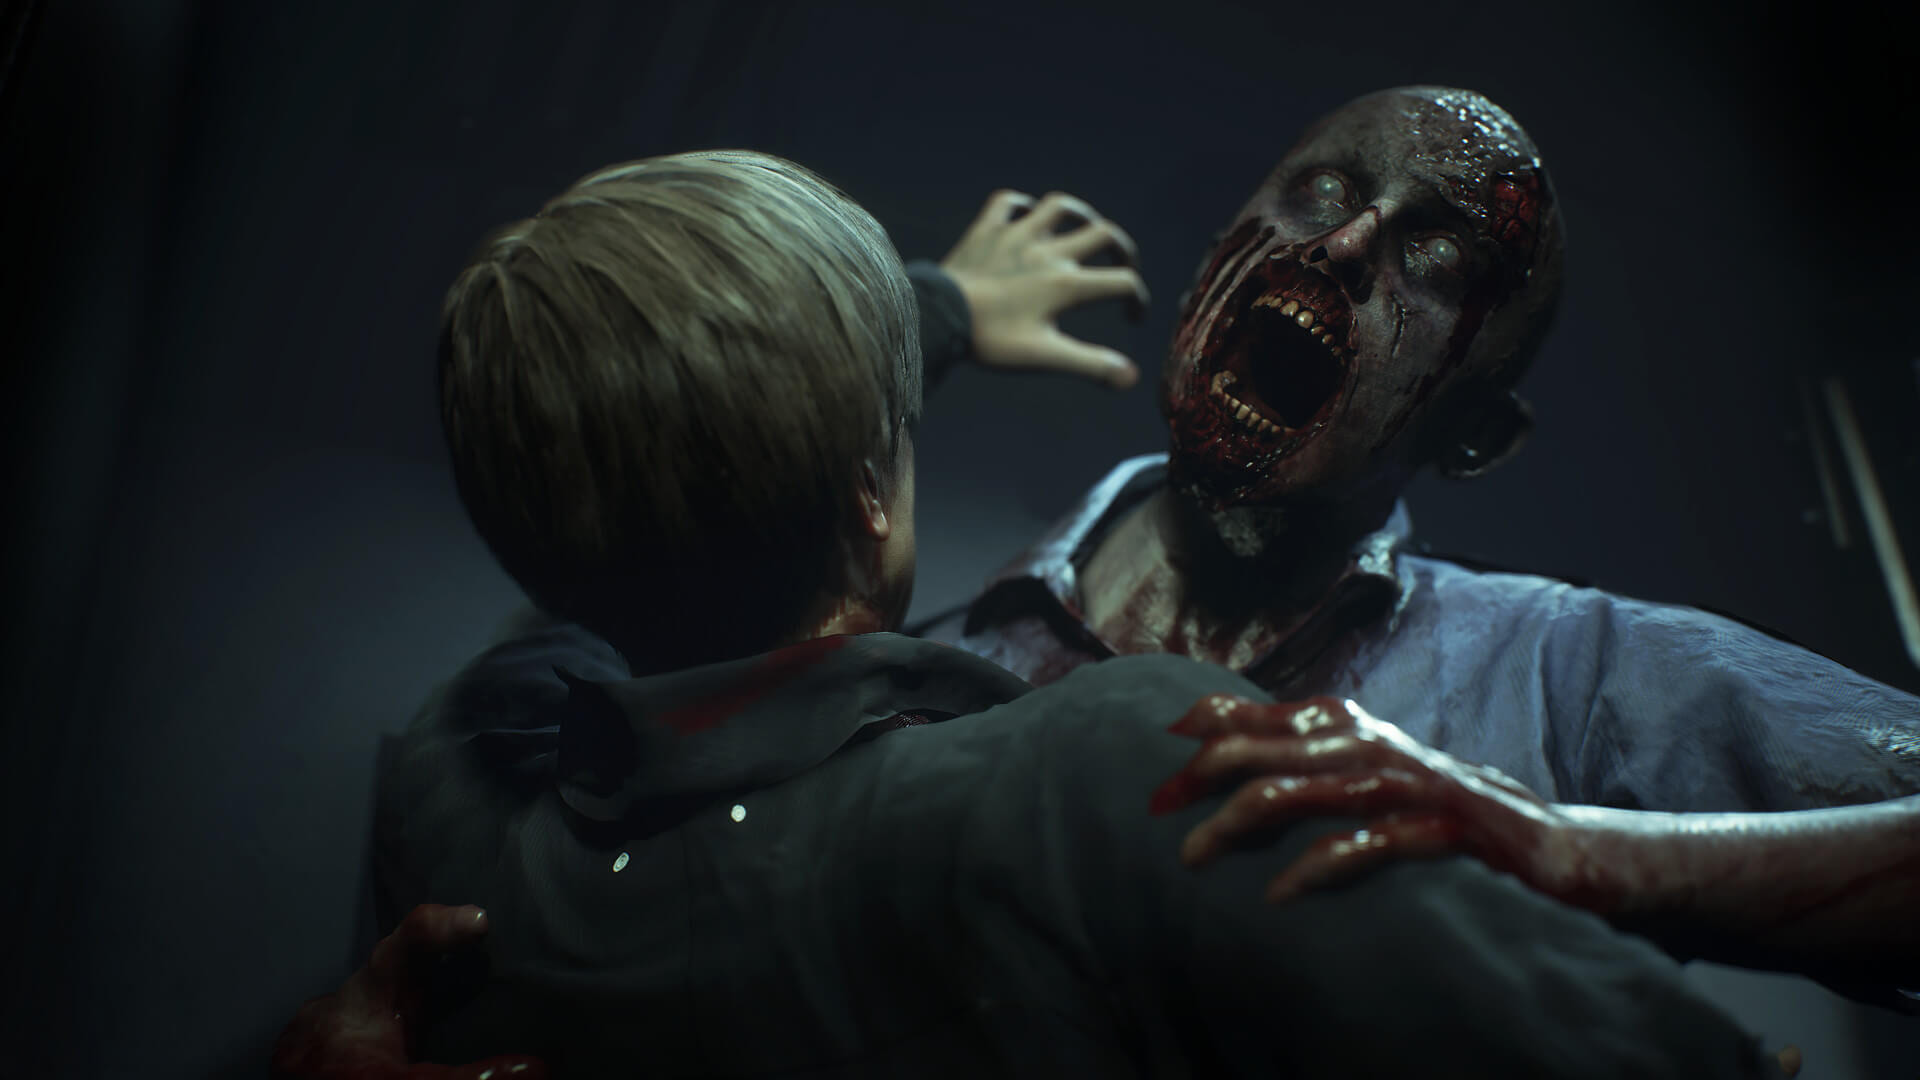 Resident Evil Decades of Horror Bundle is available now at Humble